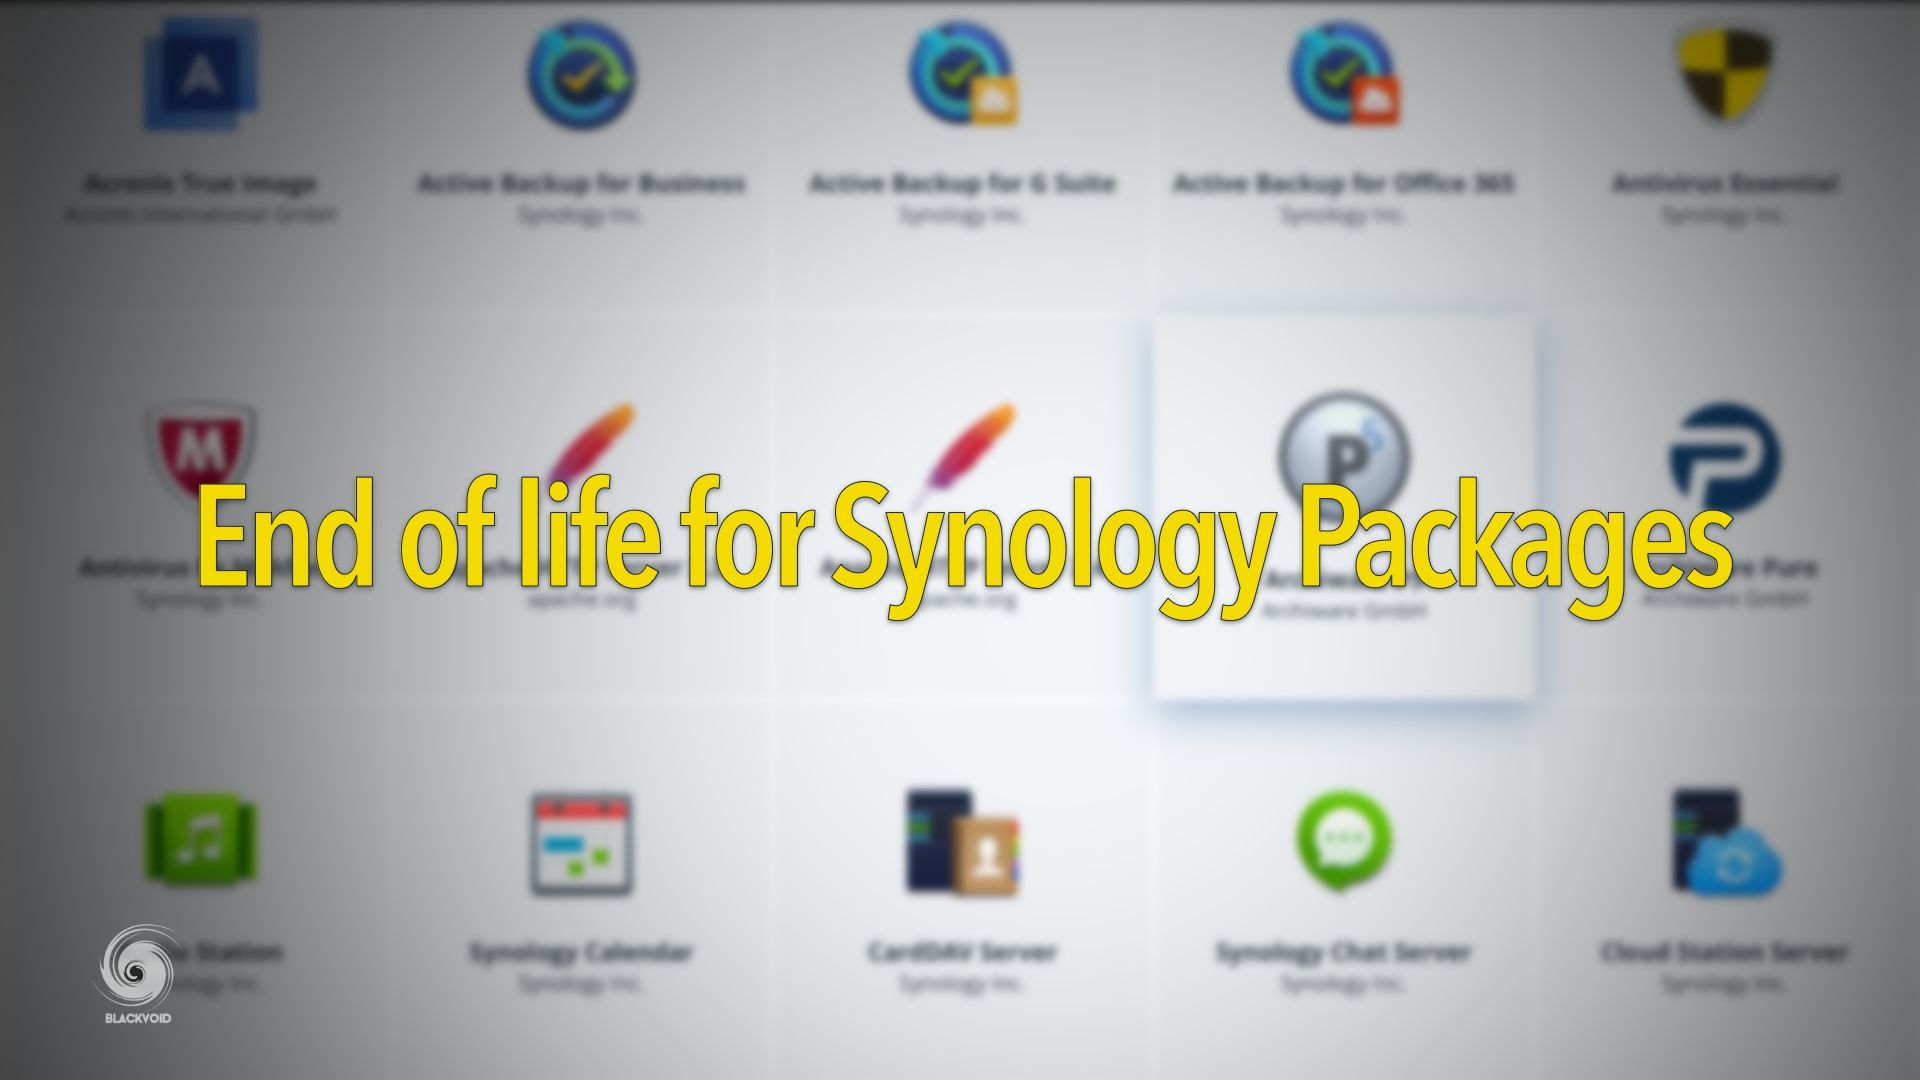 End of life for some Synology packages